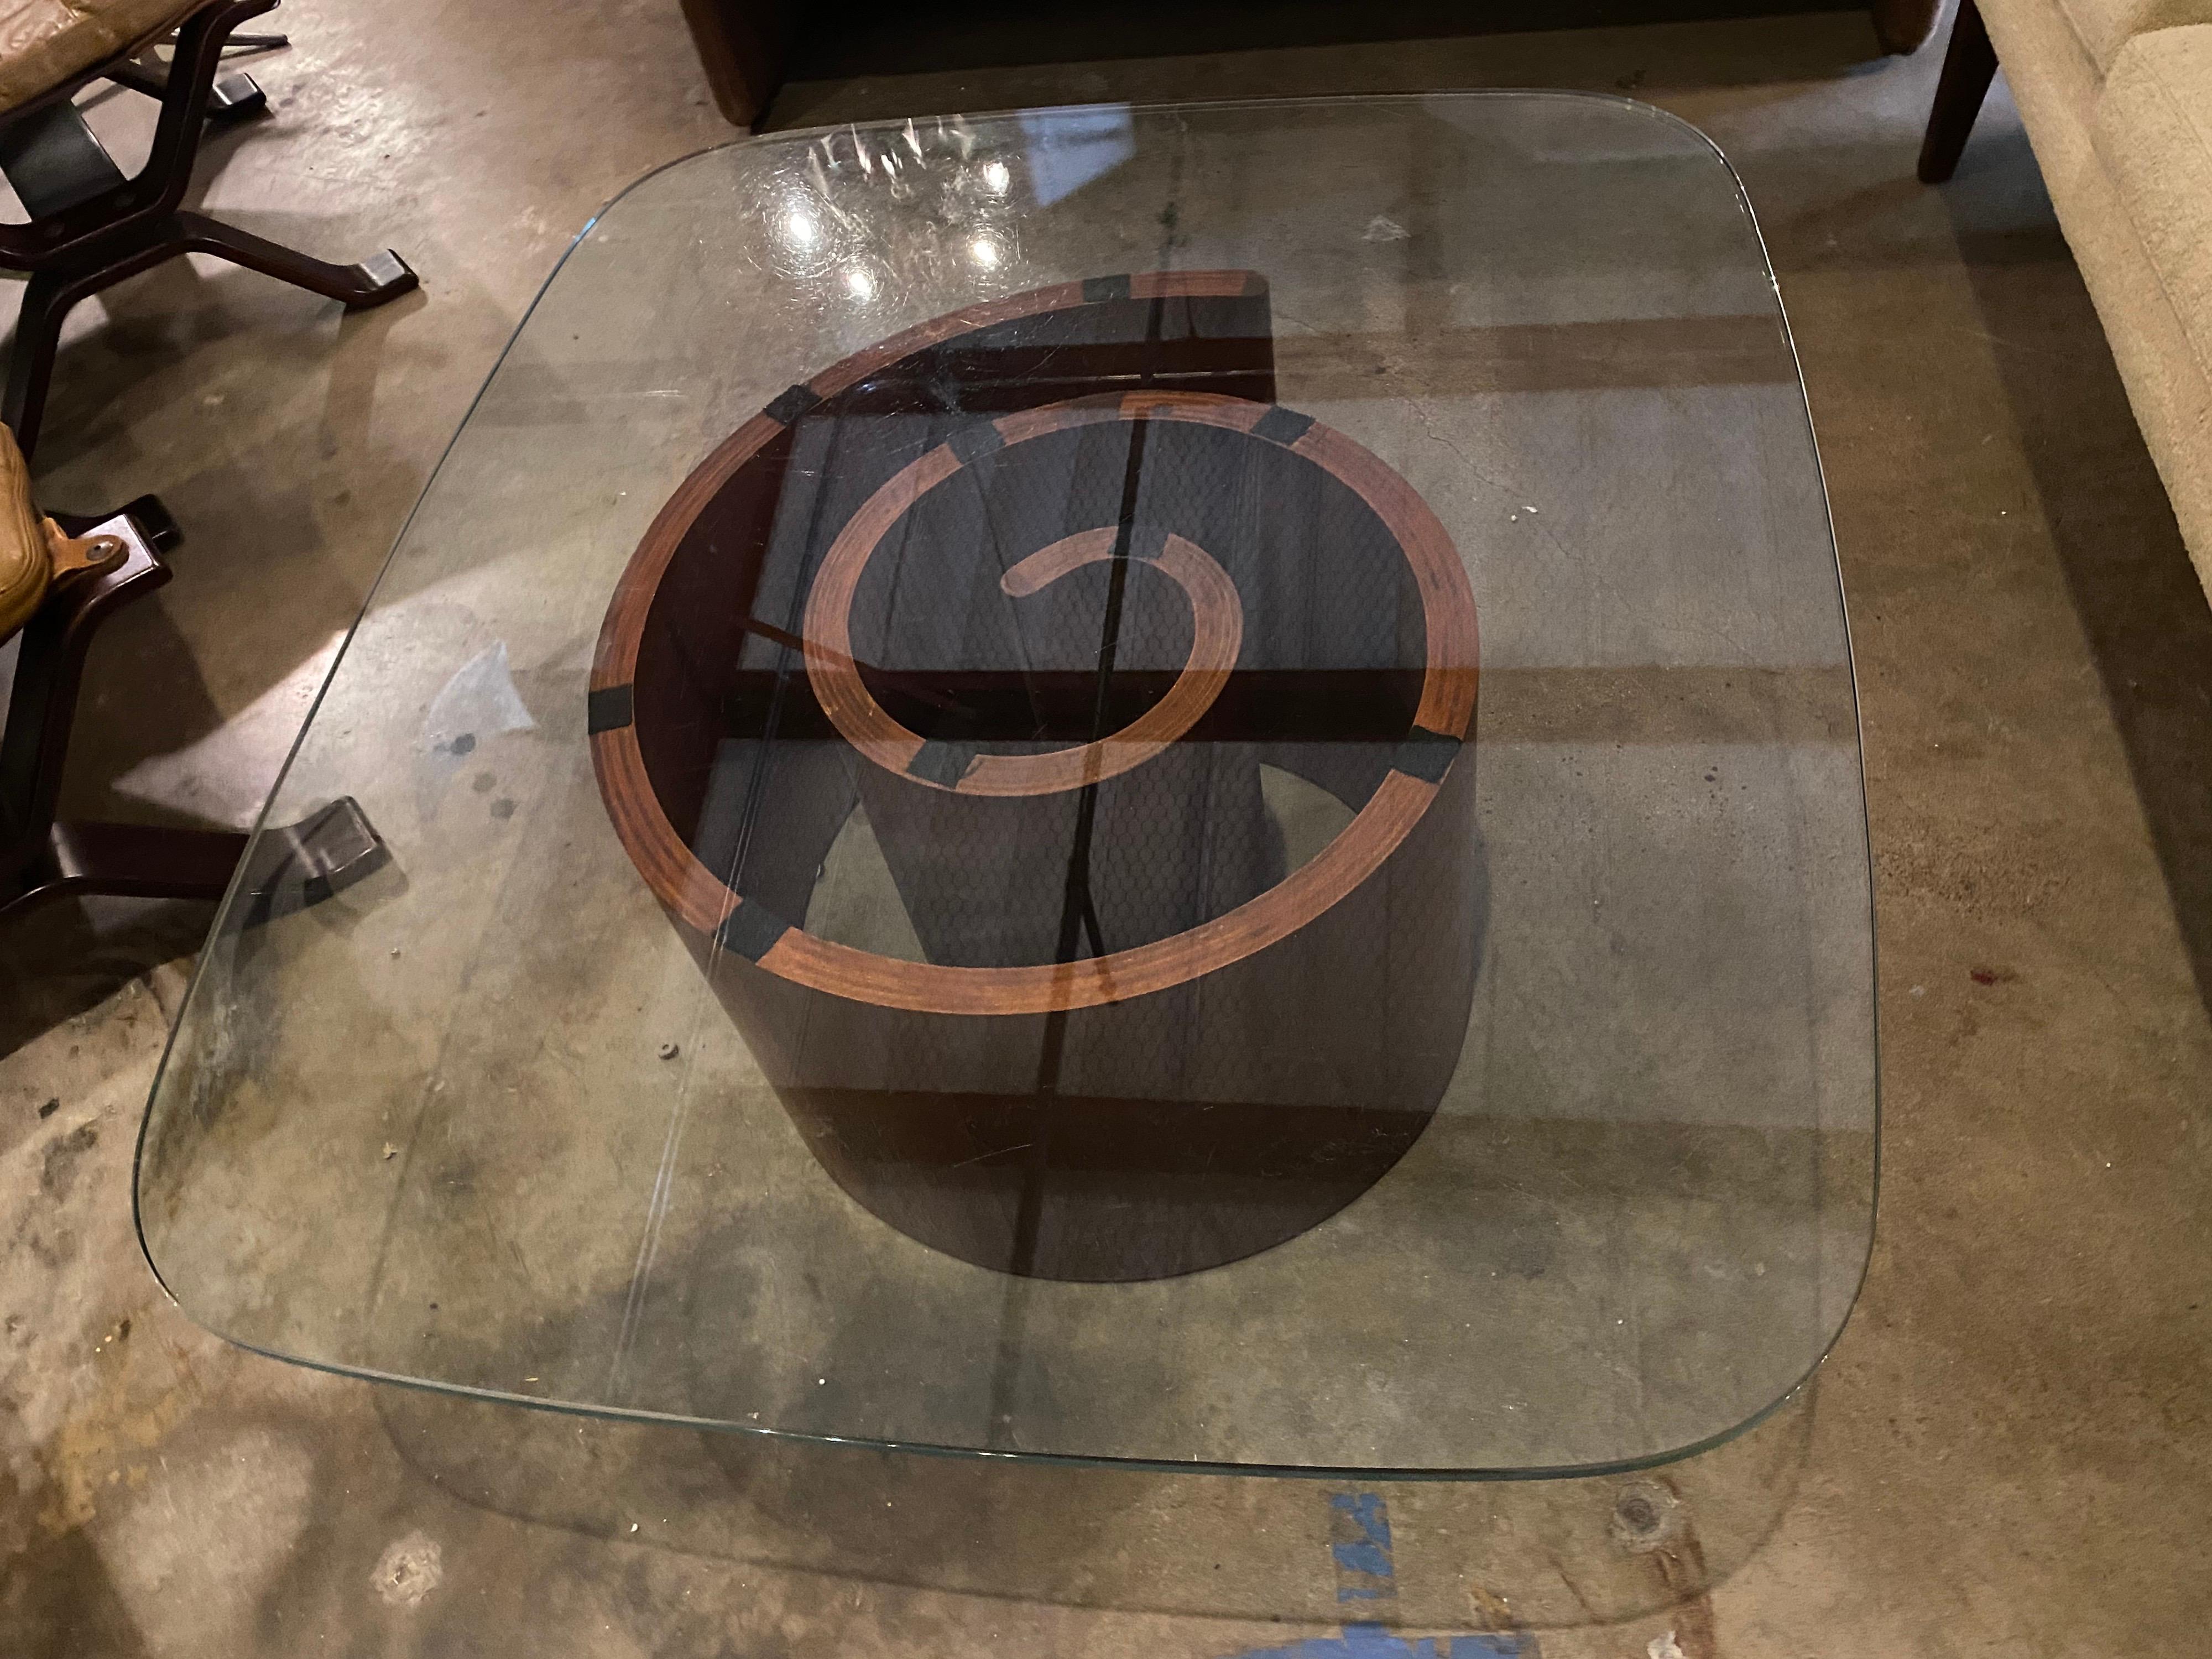 Mid-Century Modern coffee table designed by architect Vladimir Kagan. The snail-like spiral base is made of walnut with a curved rectangular glass top. Minor scratches on glass; the base is in good condition. 

Measures: Spiral base
Height 14